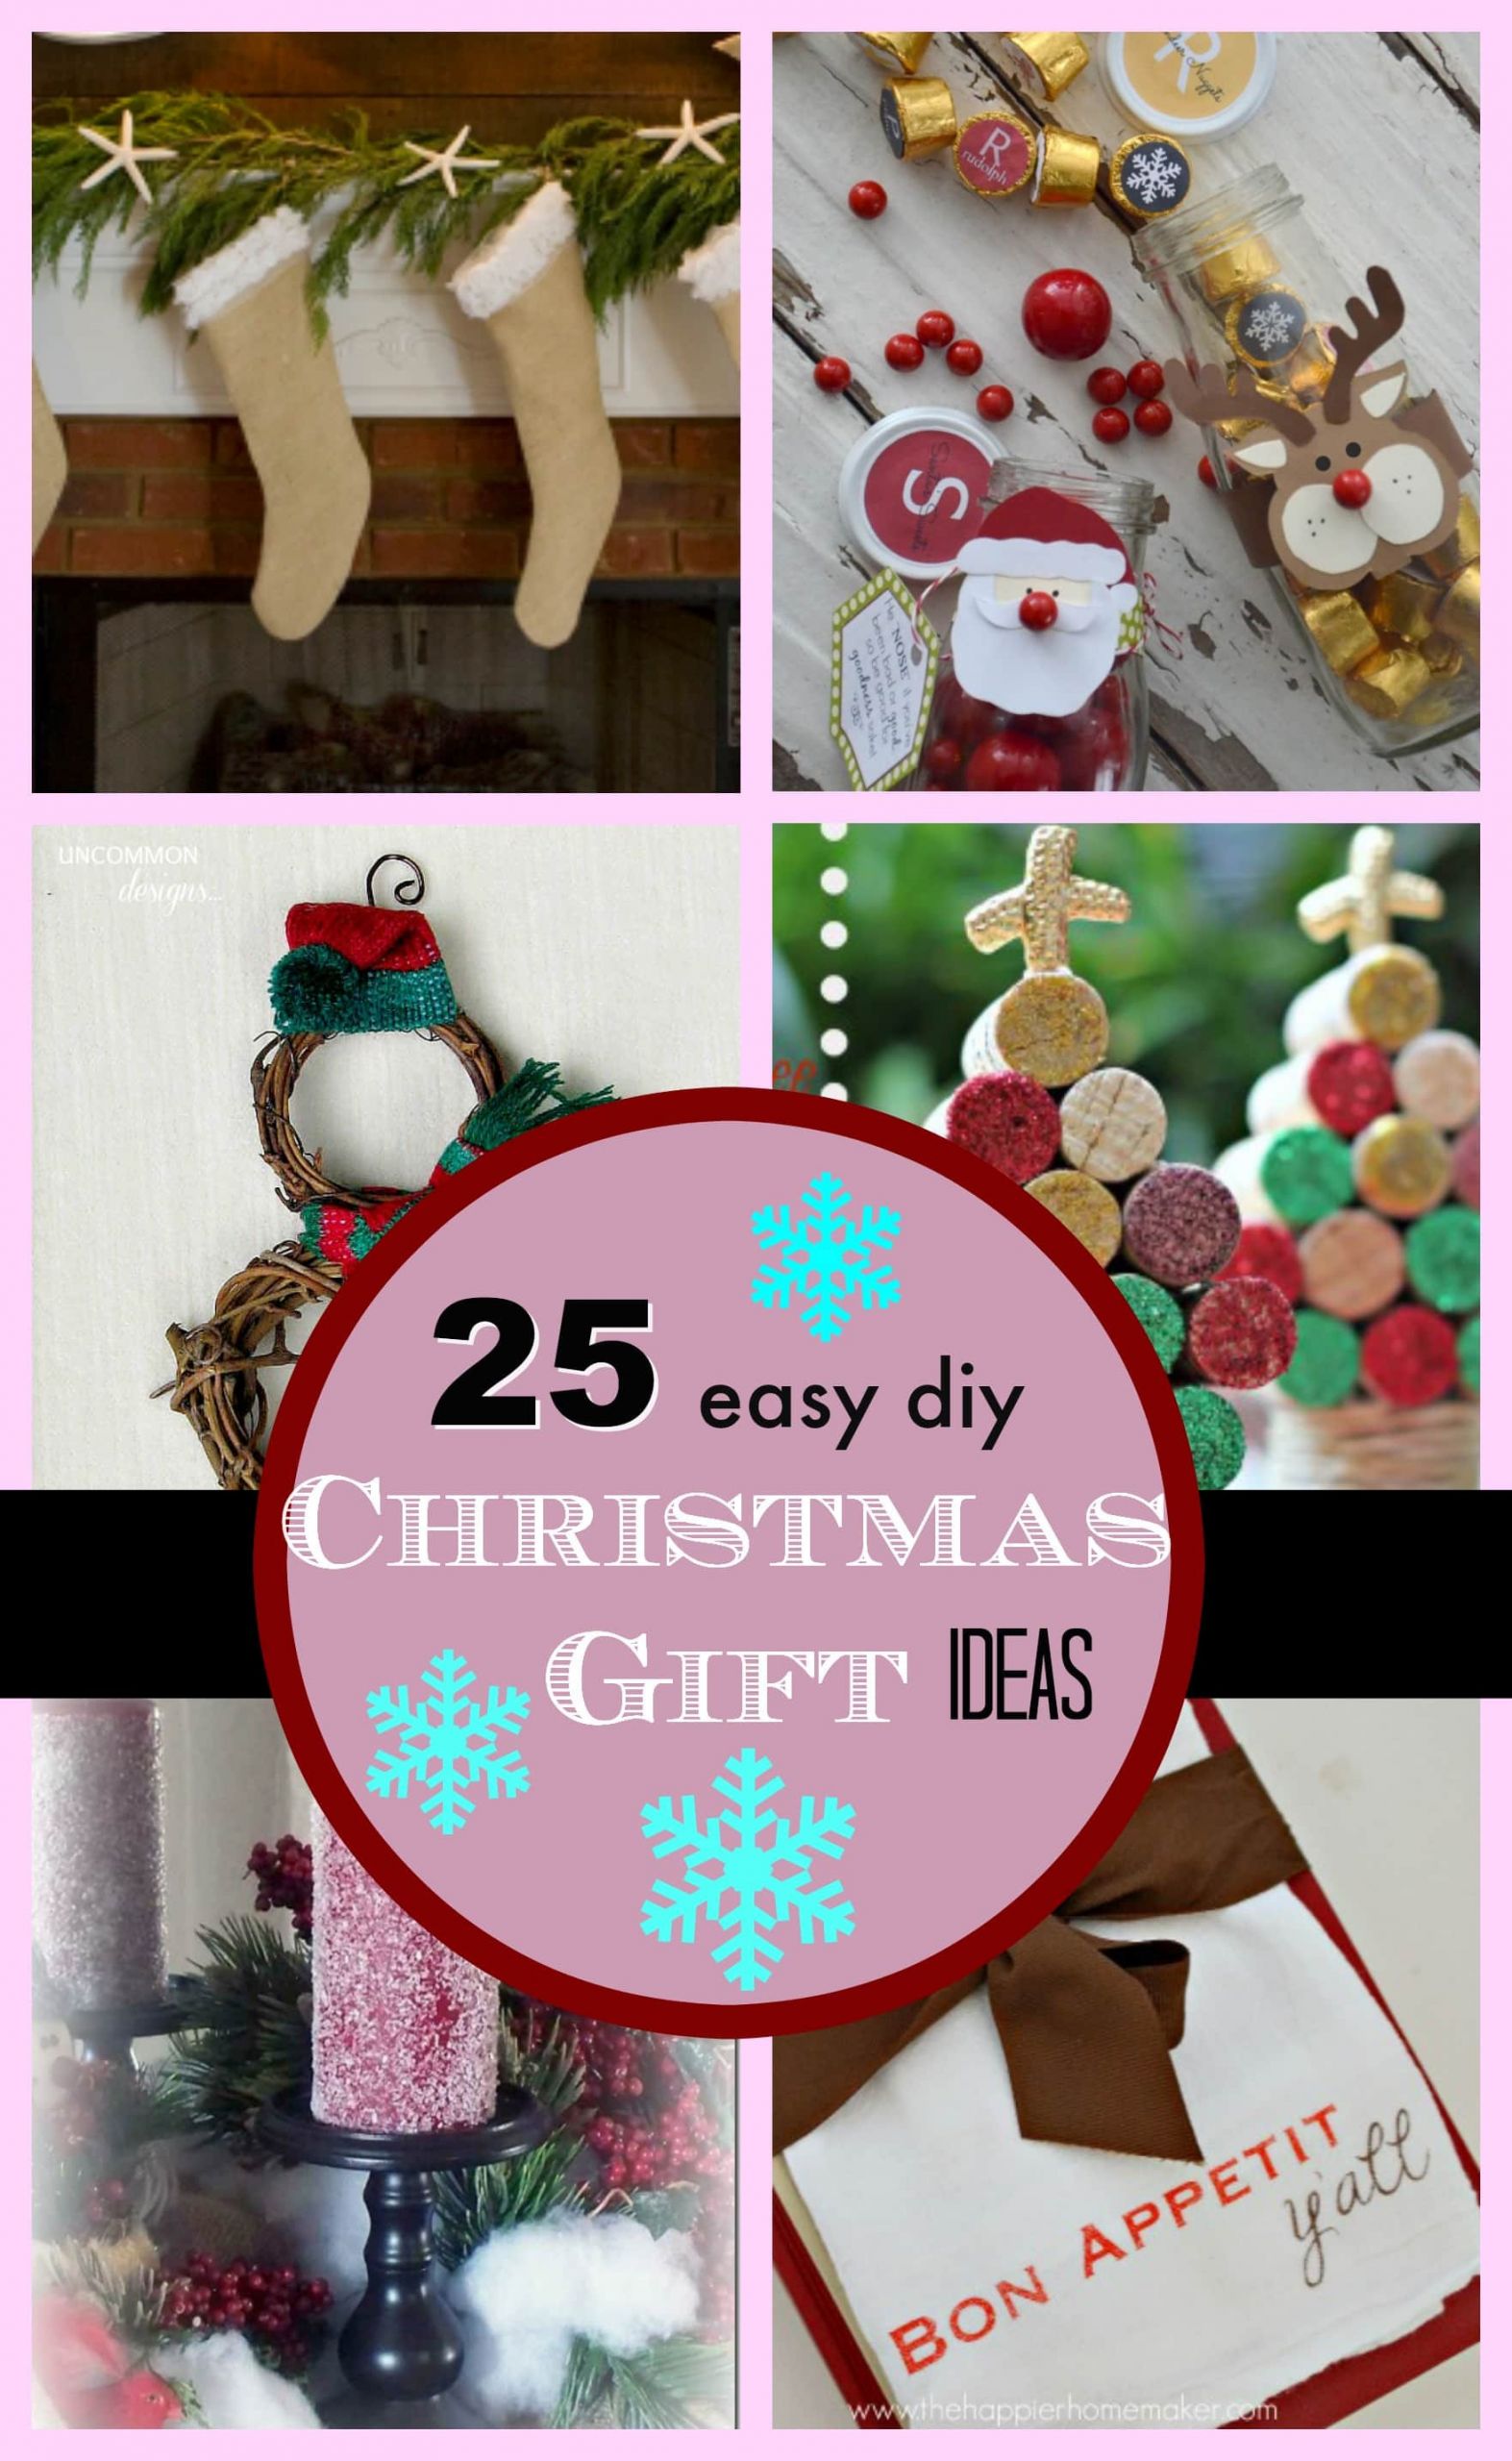 Homemade Holiday Gift Ideas
 25 DIY Easy Christmas Gift Ideas PinkWhen